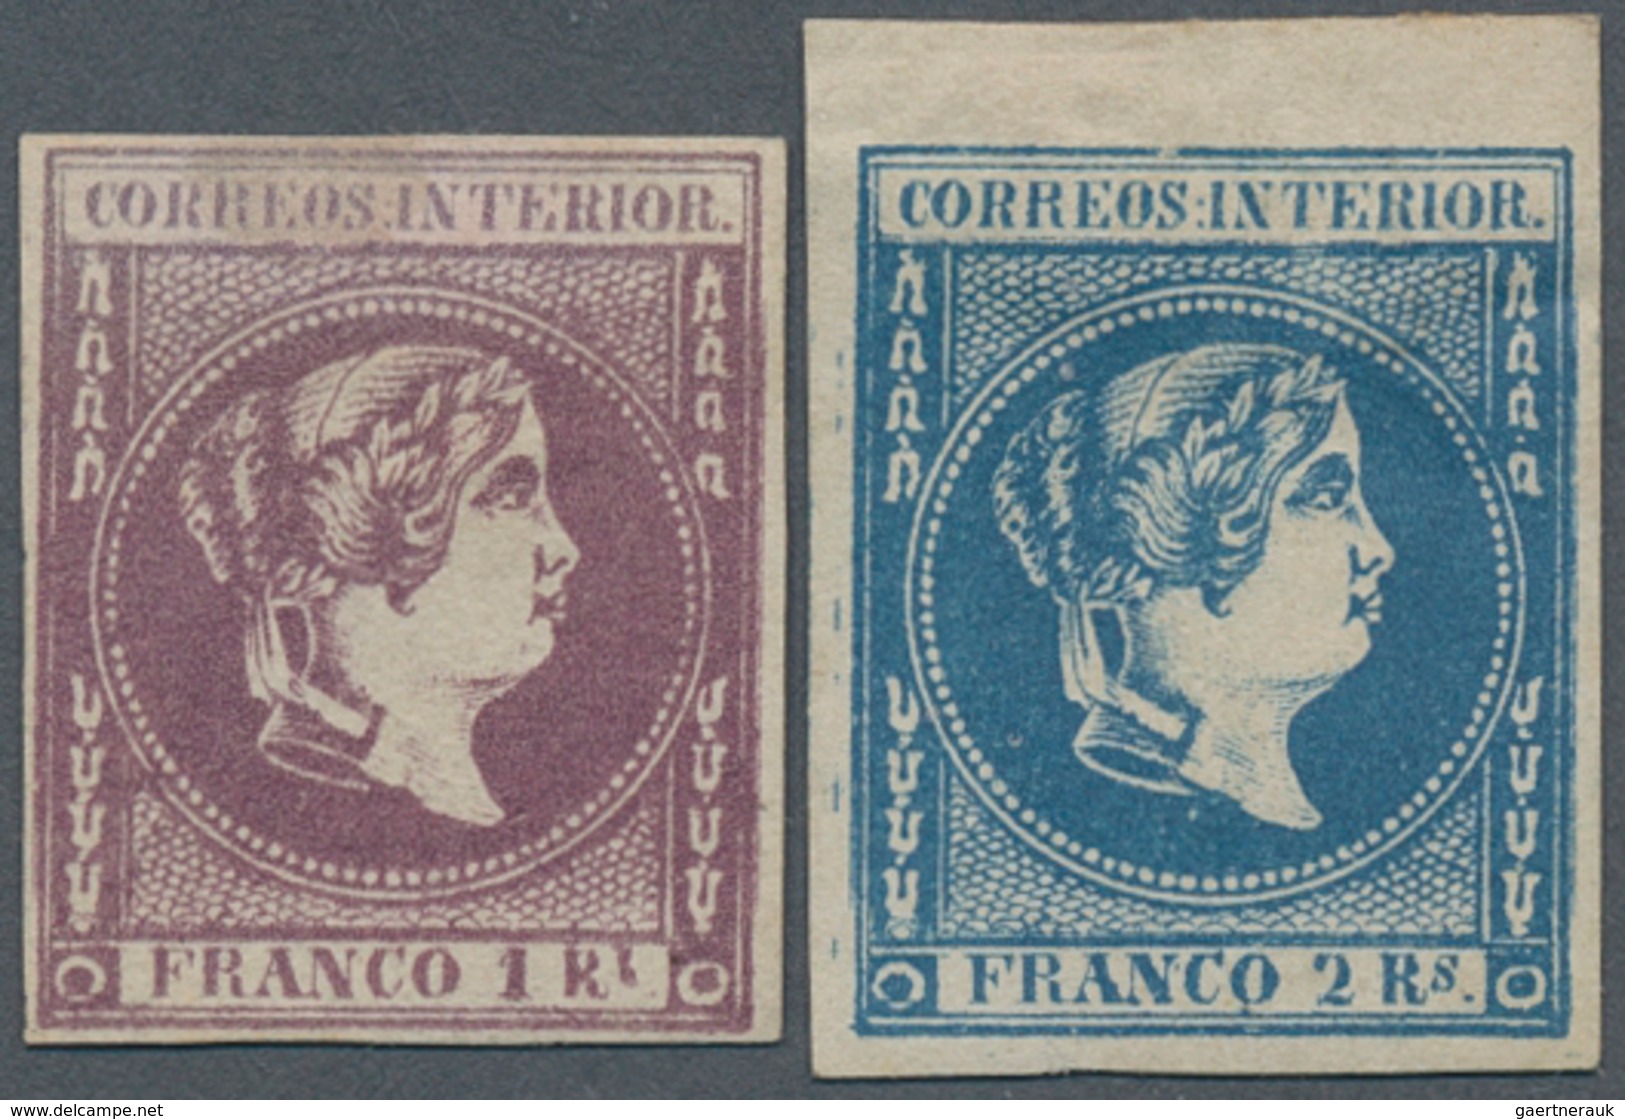 09615 Philippinen: 1863. 1 R Violett And 2 R Blue, Very Wide Top Margin At 2 R, Fresh Colors And Very Scar - Philippines